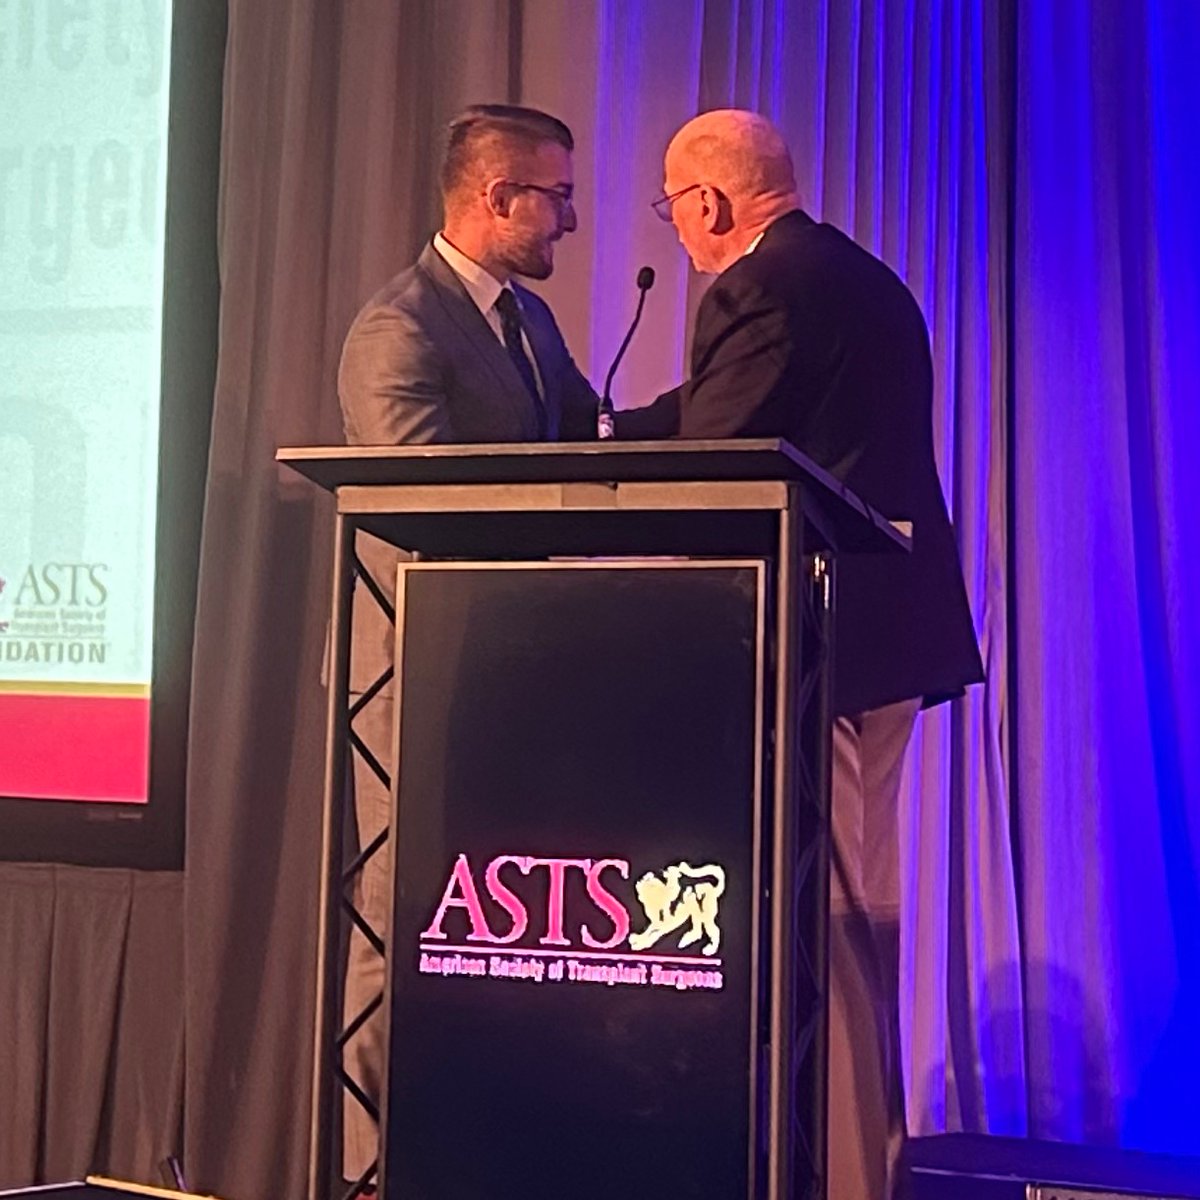 Congrats to @harvardmed student Rafal Mazur who won the medical student travel award to @ASTSChimera winter symposium! @mgh_transplant @GRaFTresearch